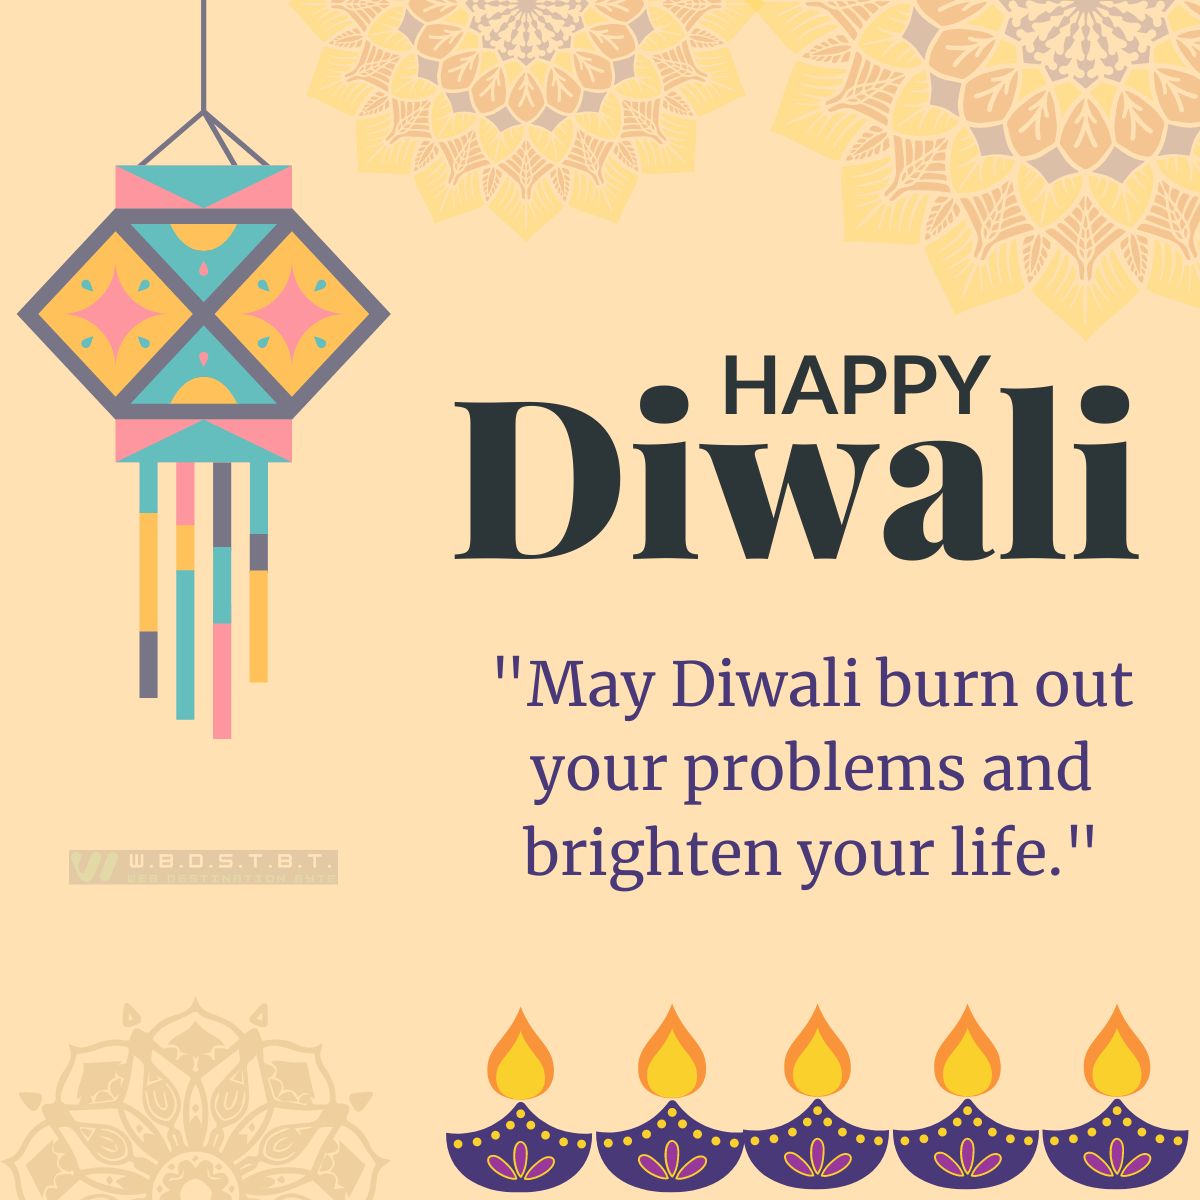 Wishes for Diwali